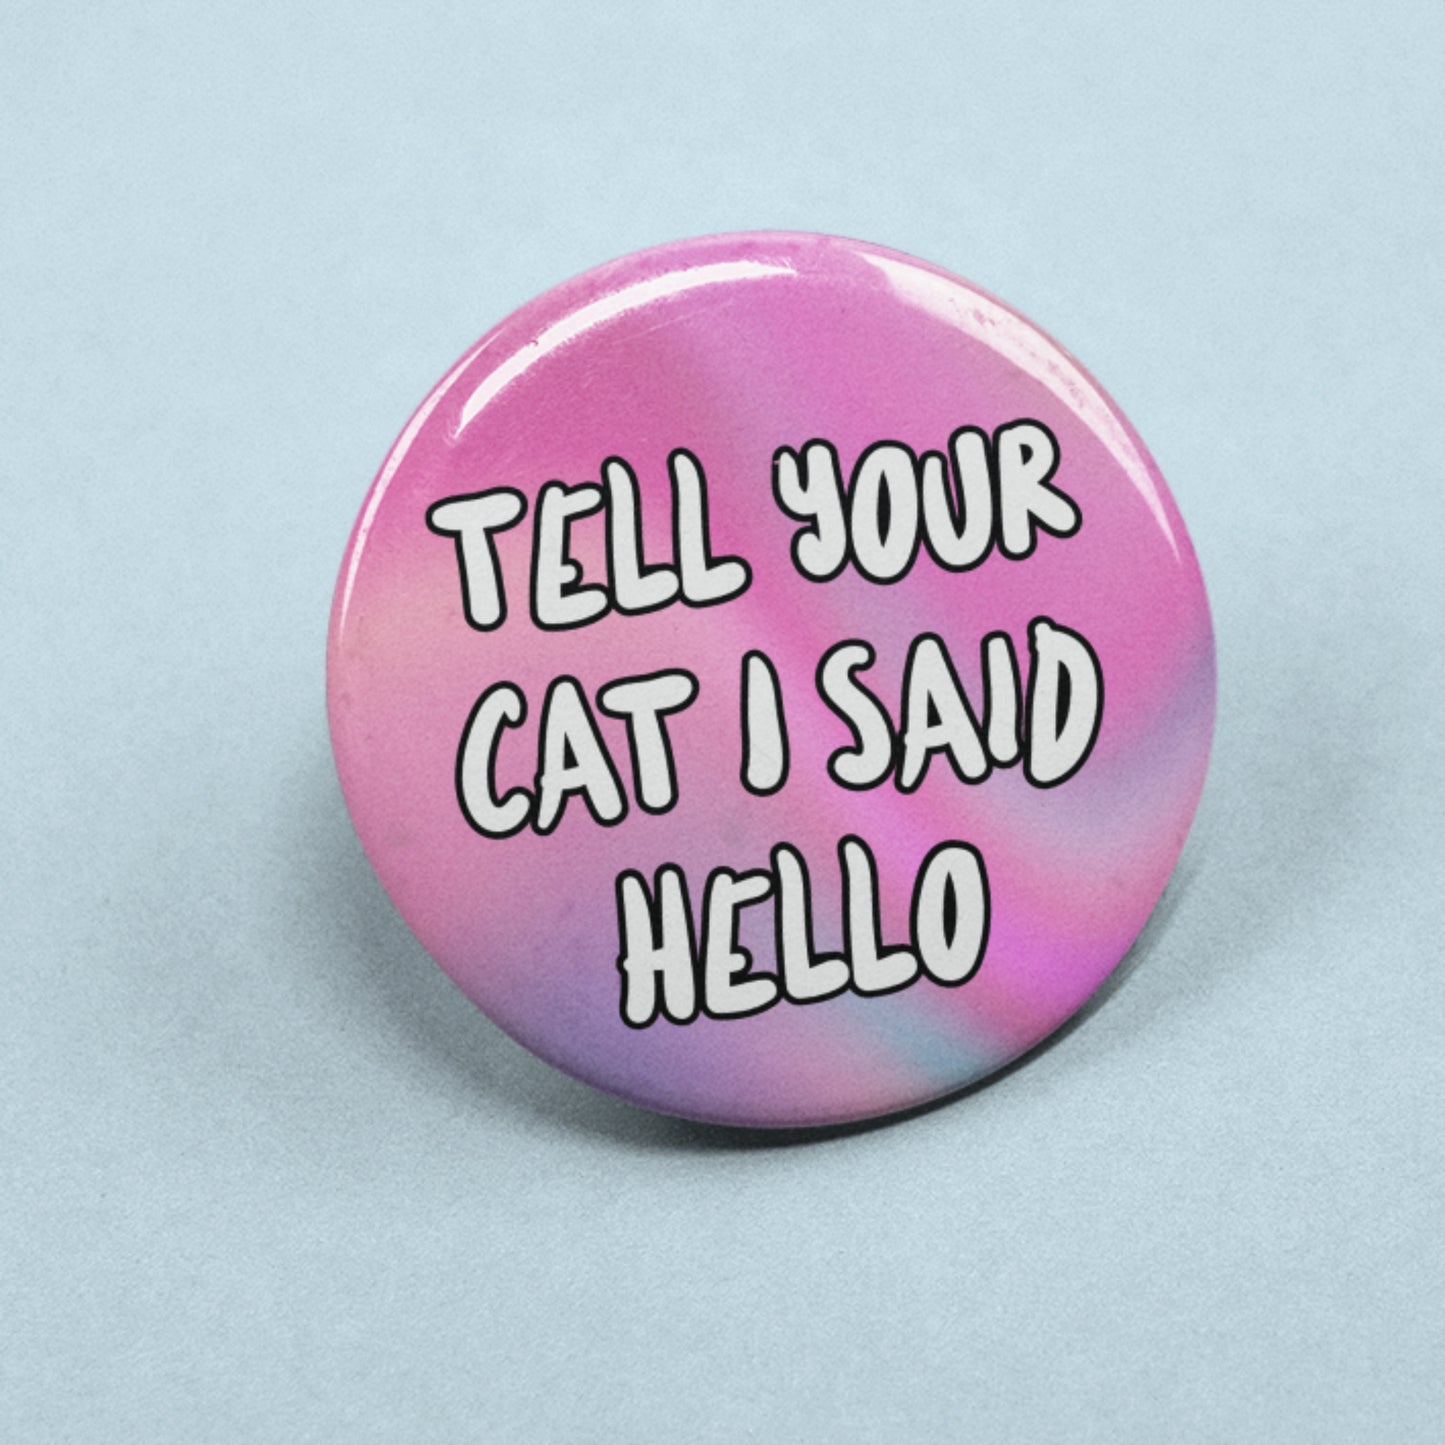 Tell Your Cat I Said Hello - Badge Pin | Cat Lover Gift, Cat Pins, Birthday Present